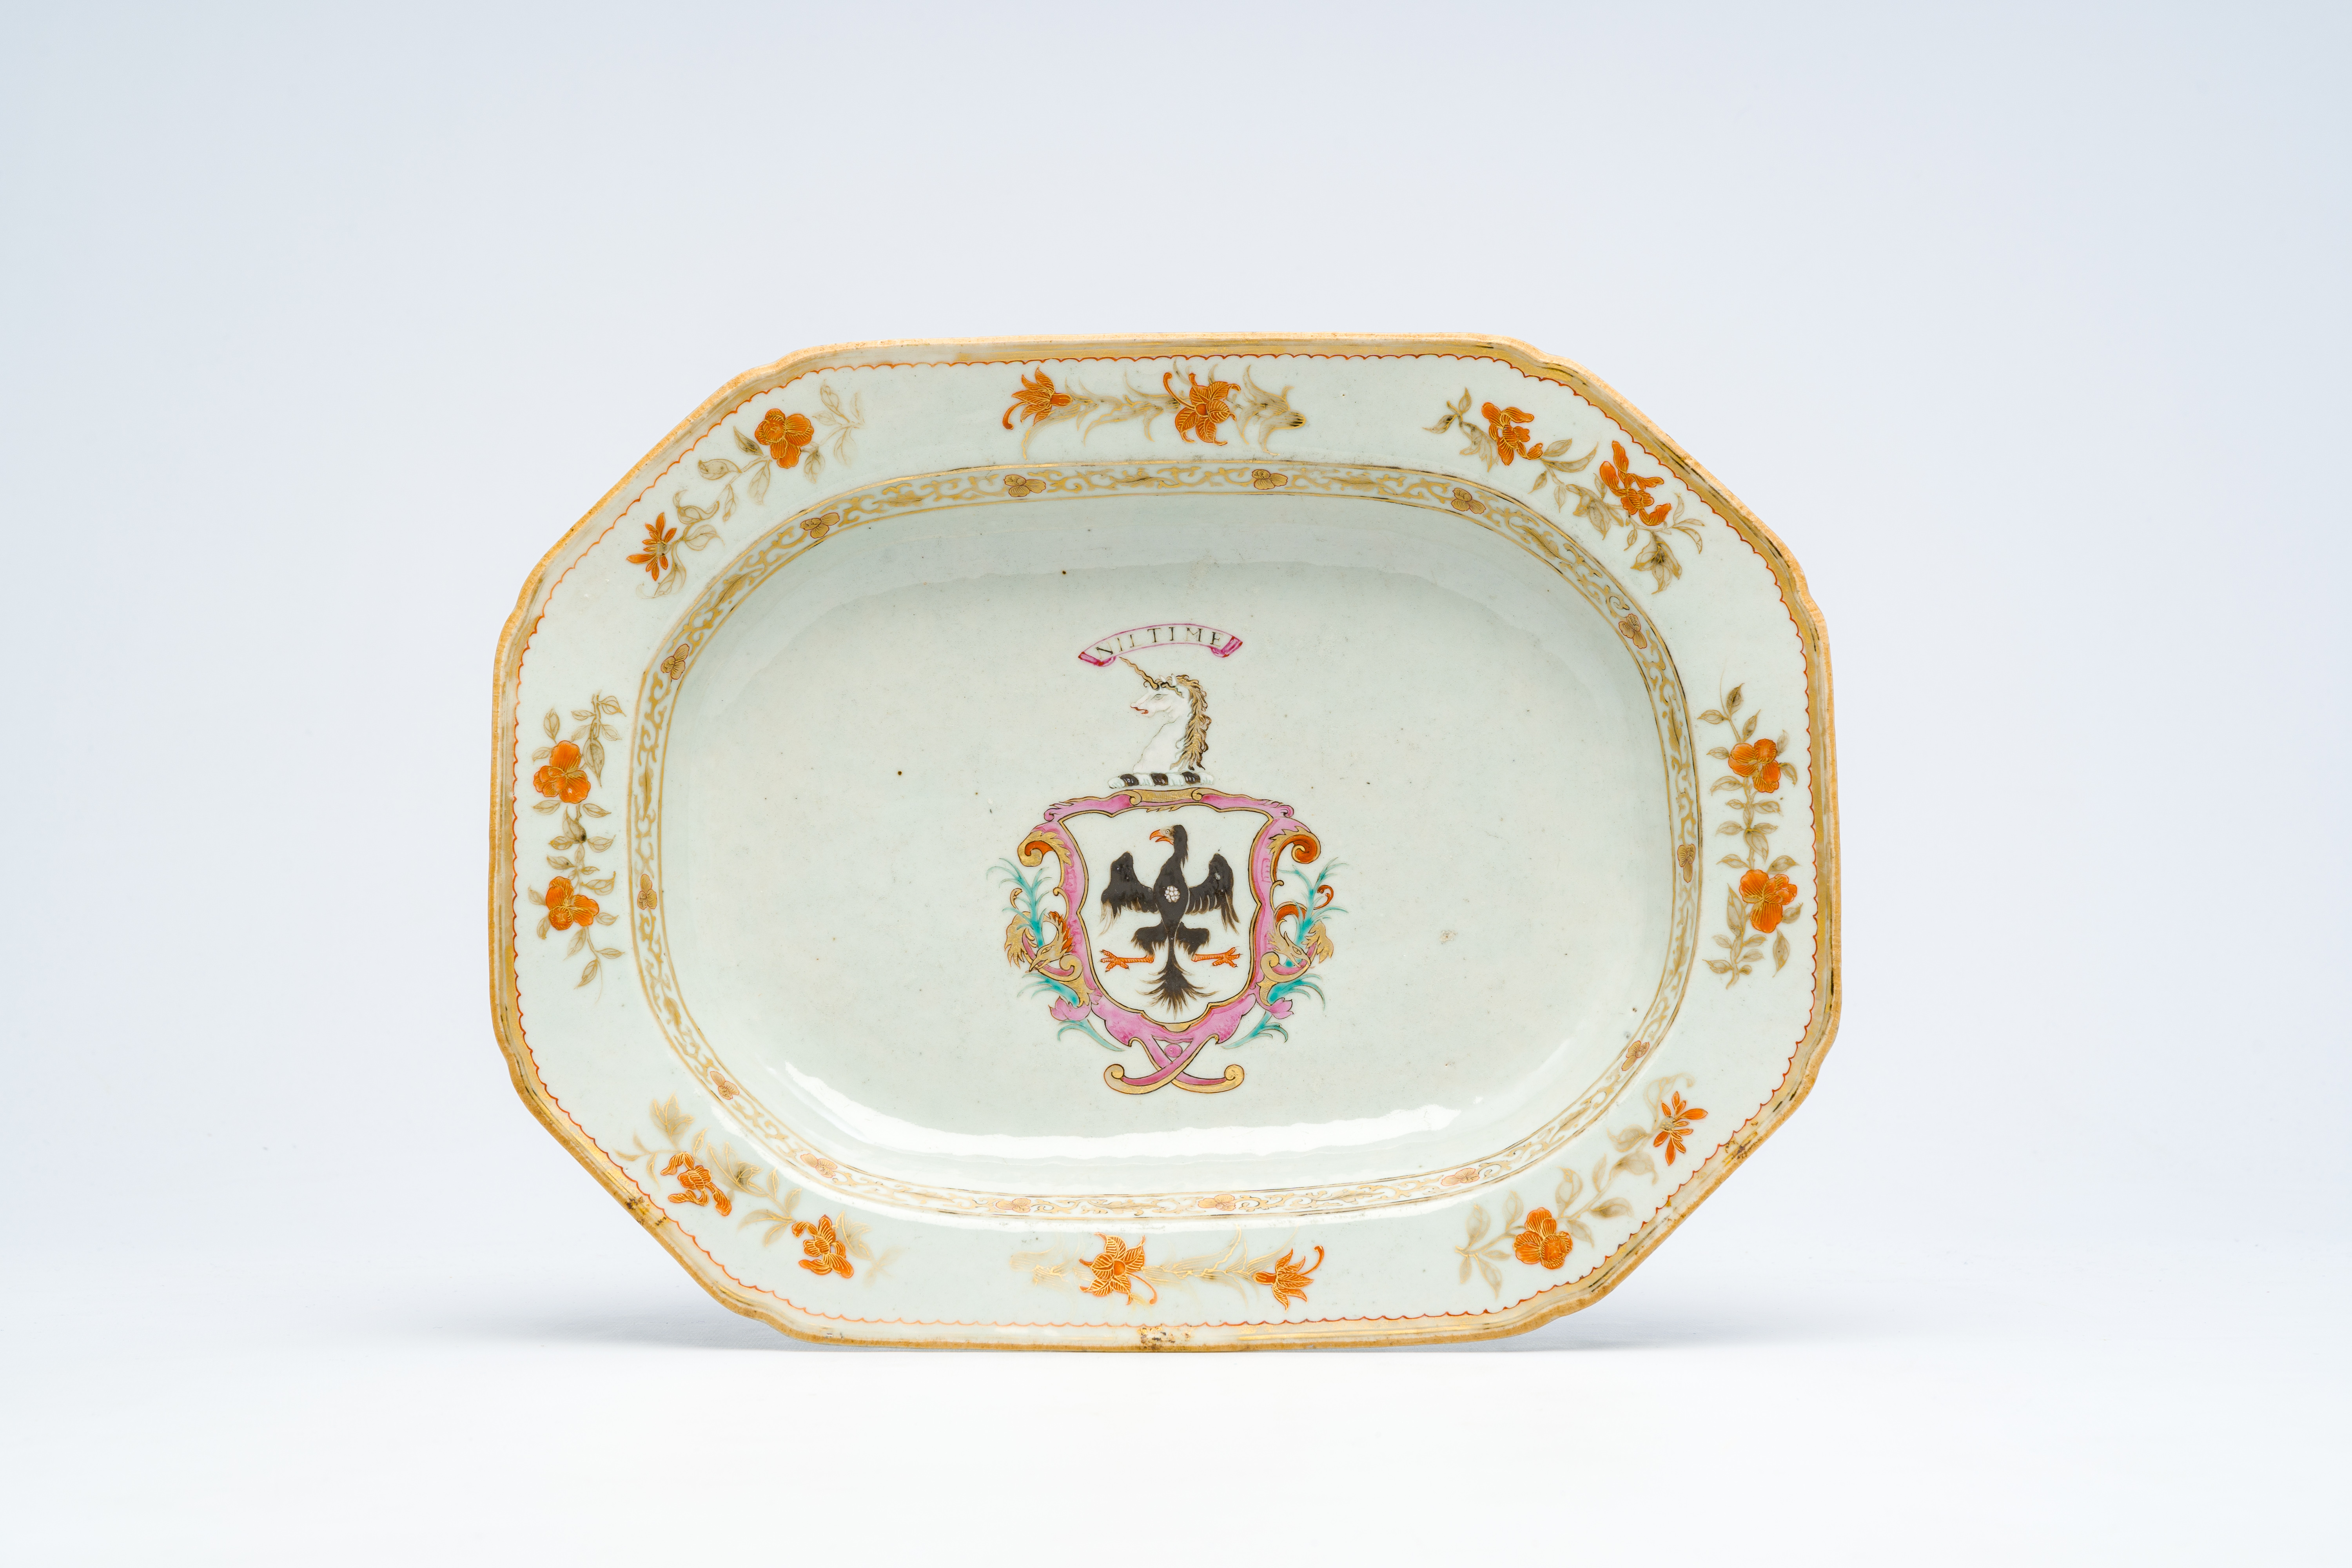 A Chinese famille rose English market armorial dish with the arms of Ramsay with a black eagle, a un